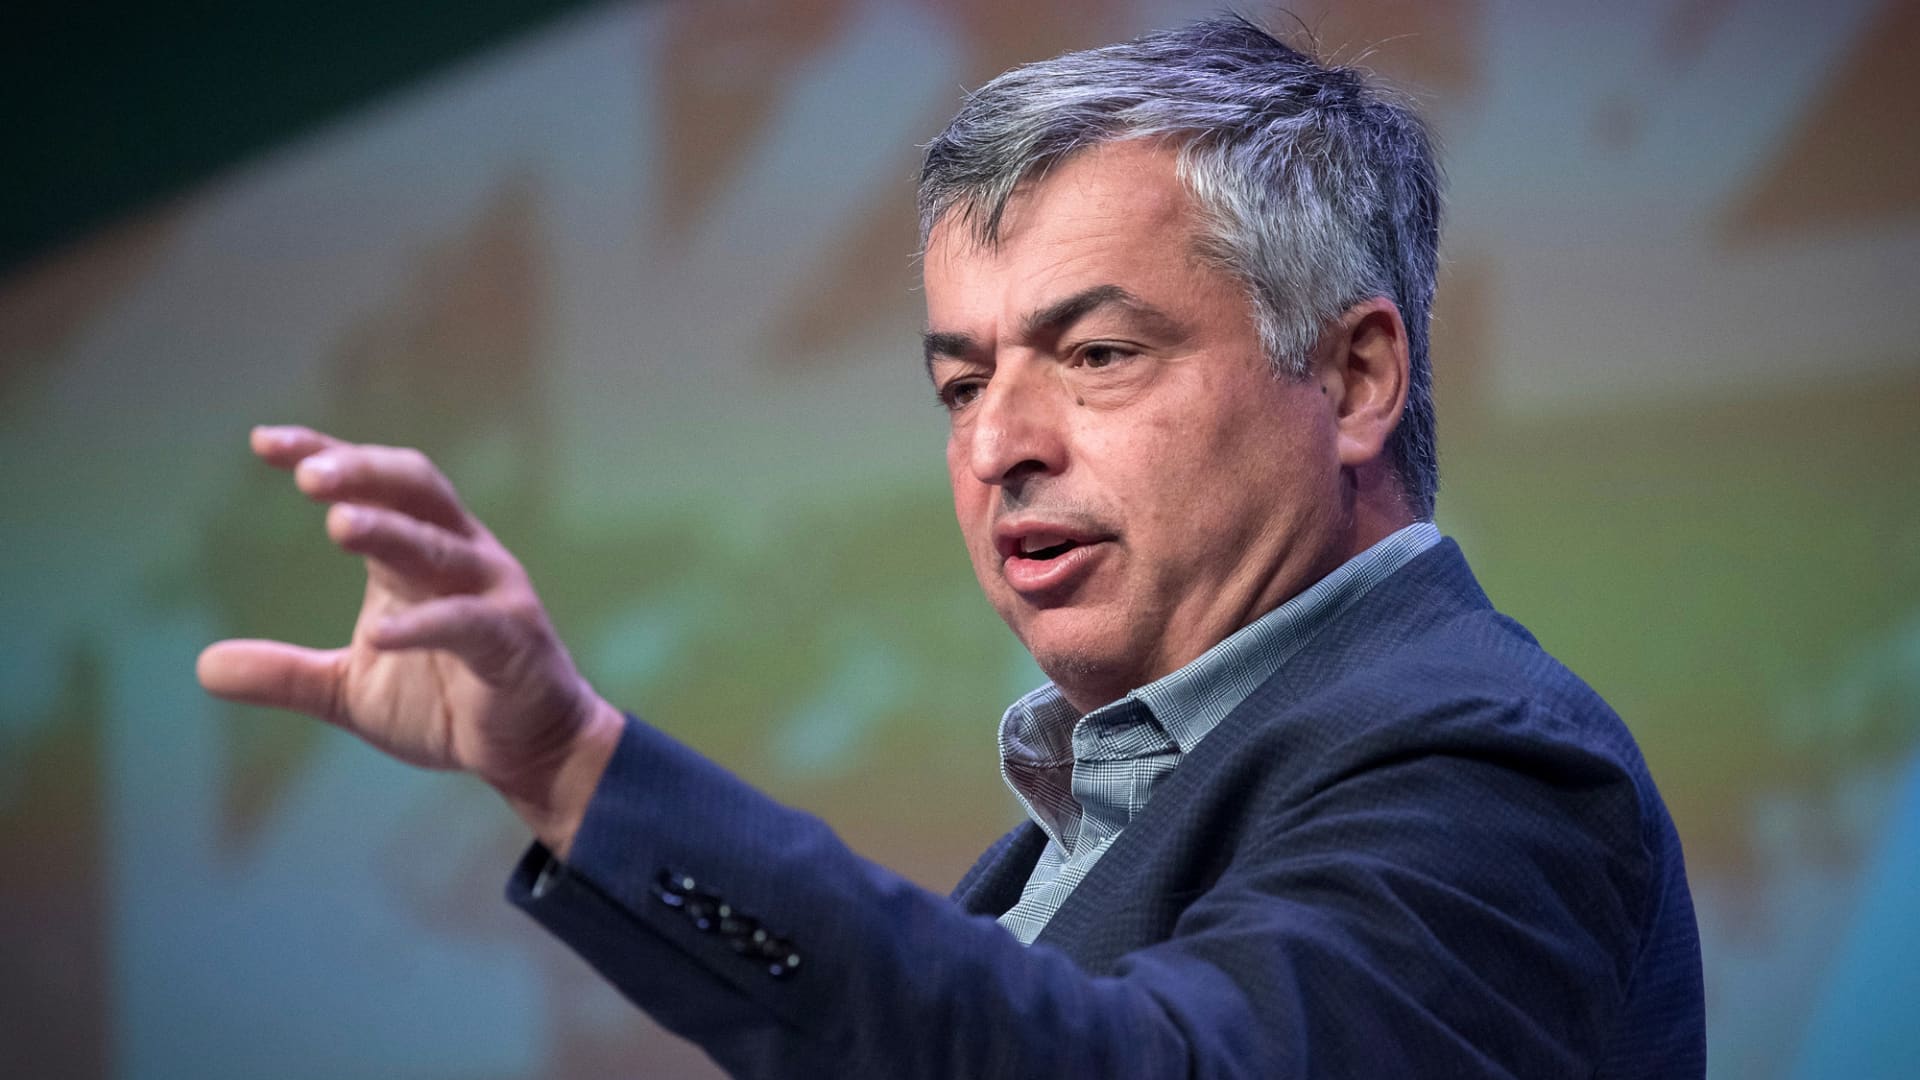 Apple’s Eddy Cue says success starts by saying ‘no’ to almost everything